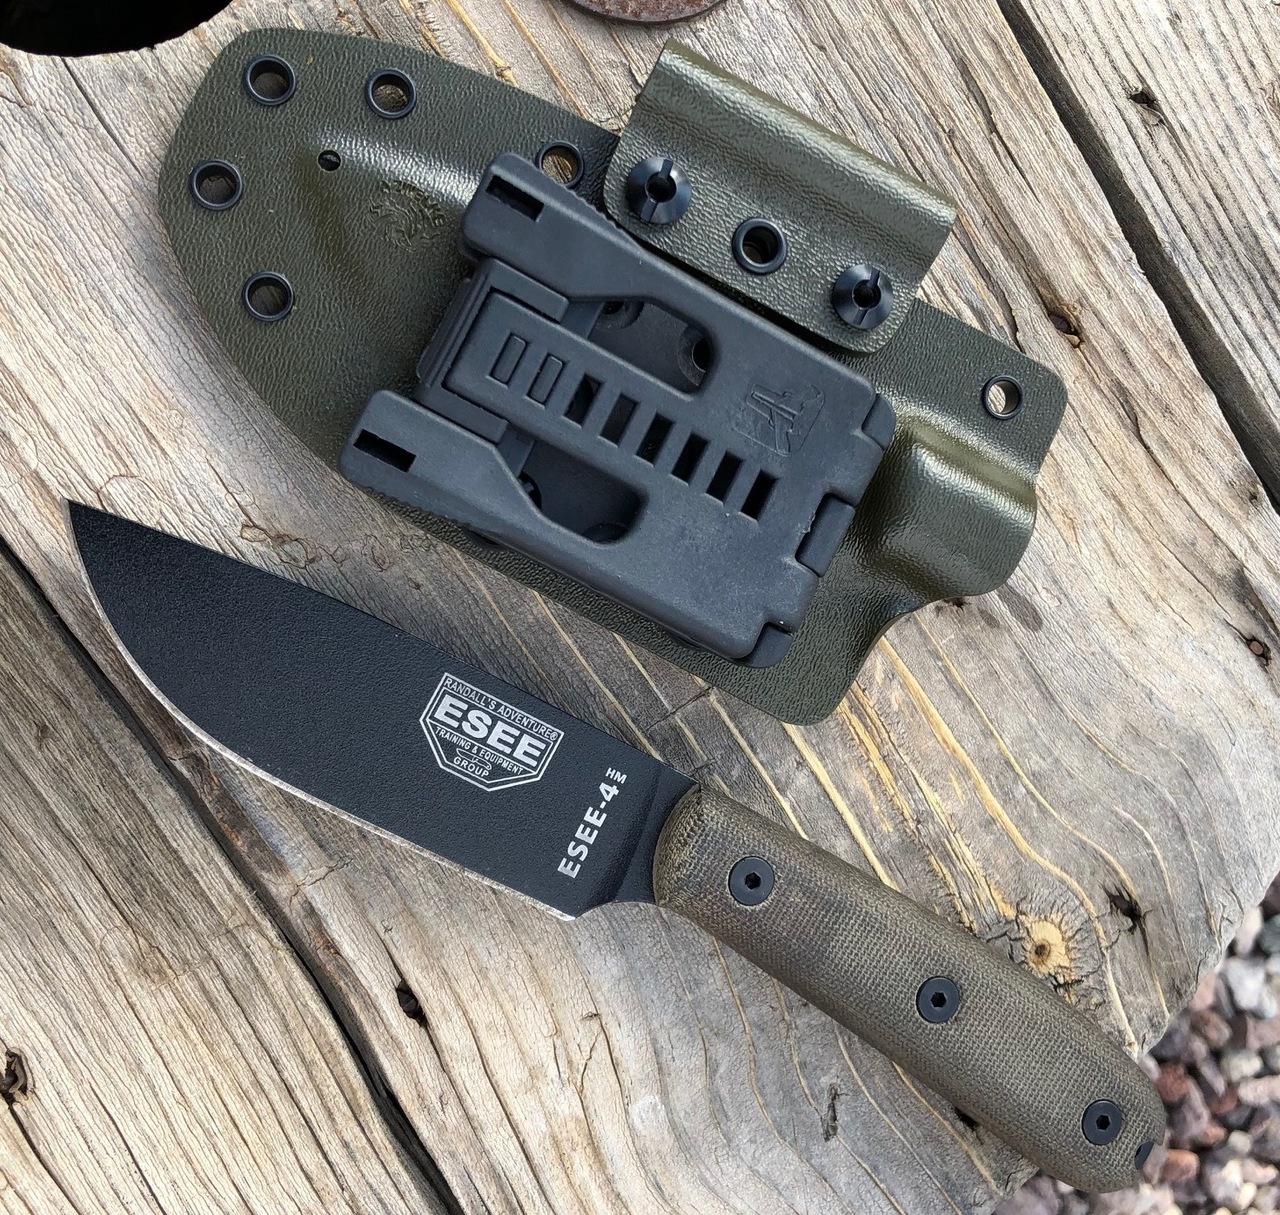 ESEE-4 with sheath